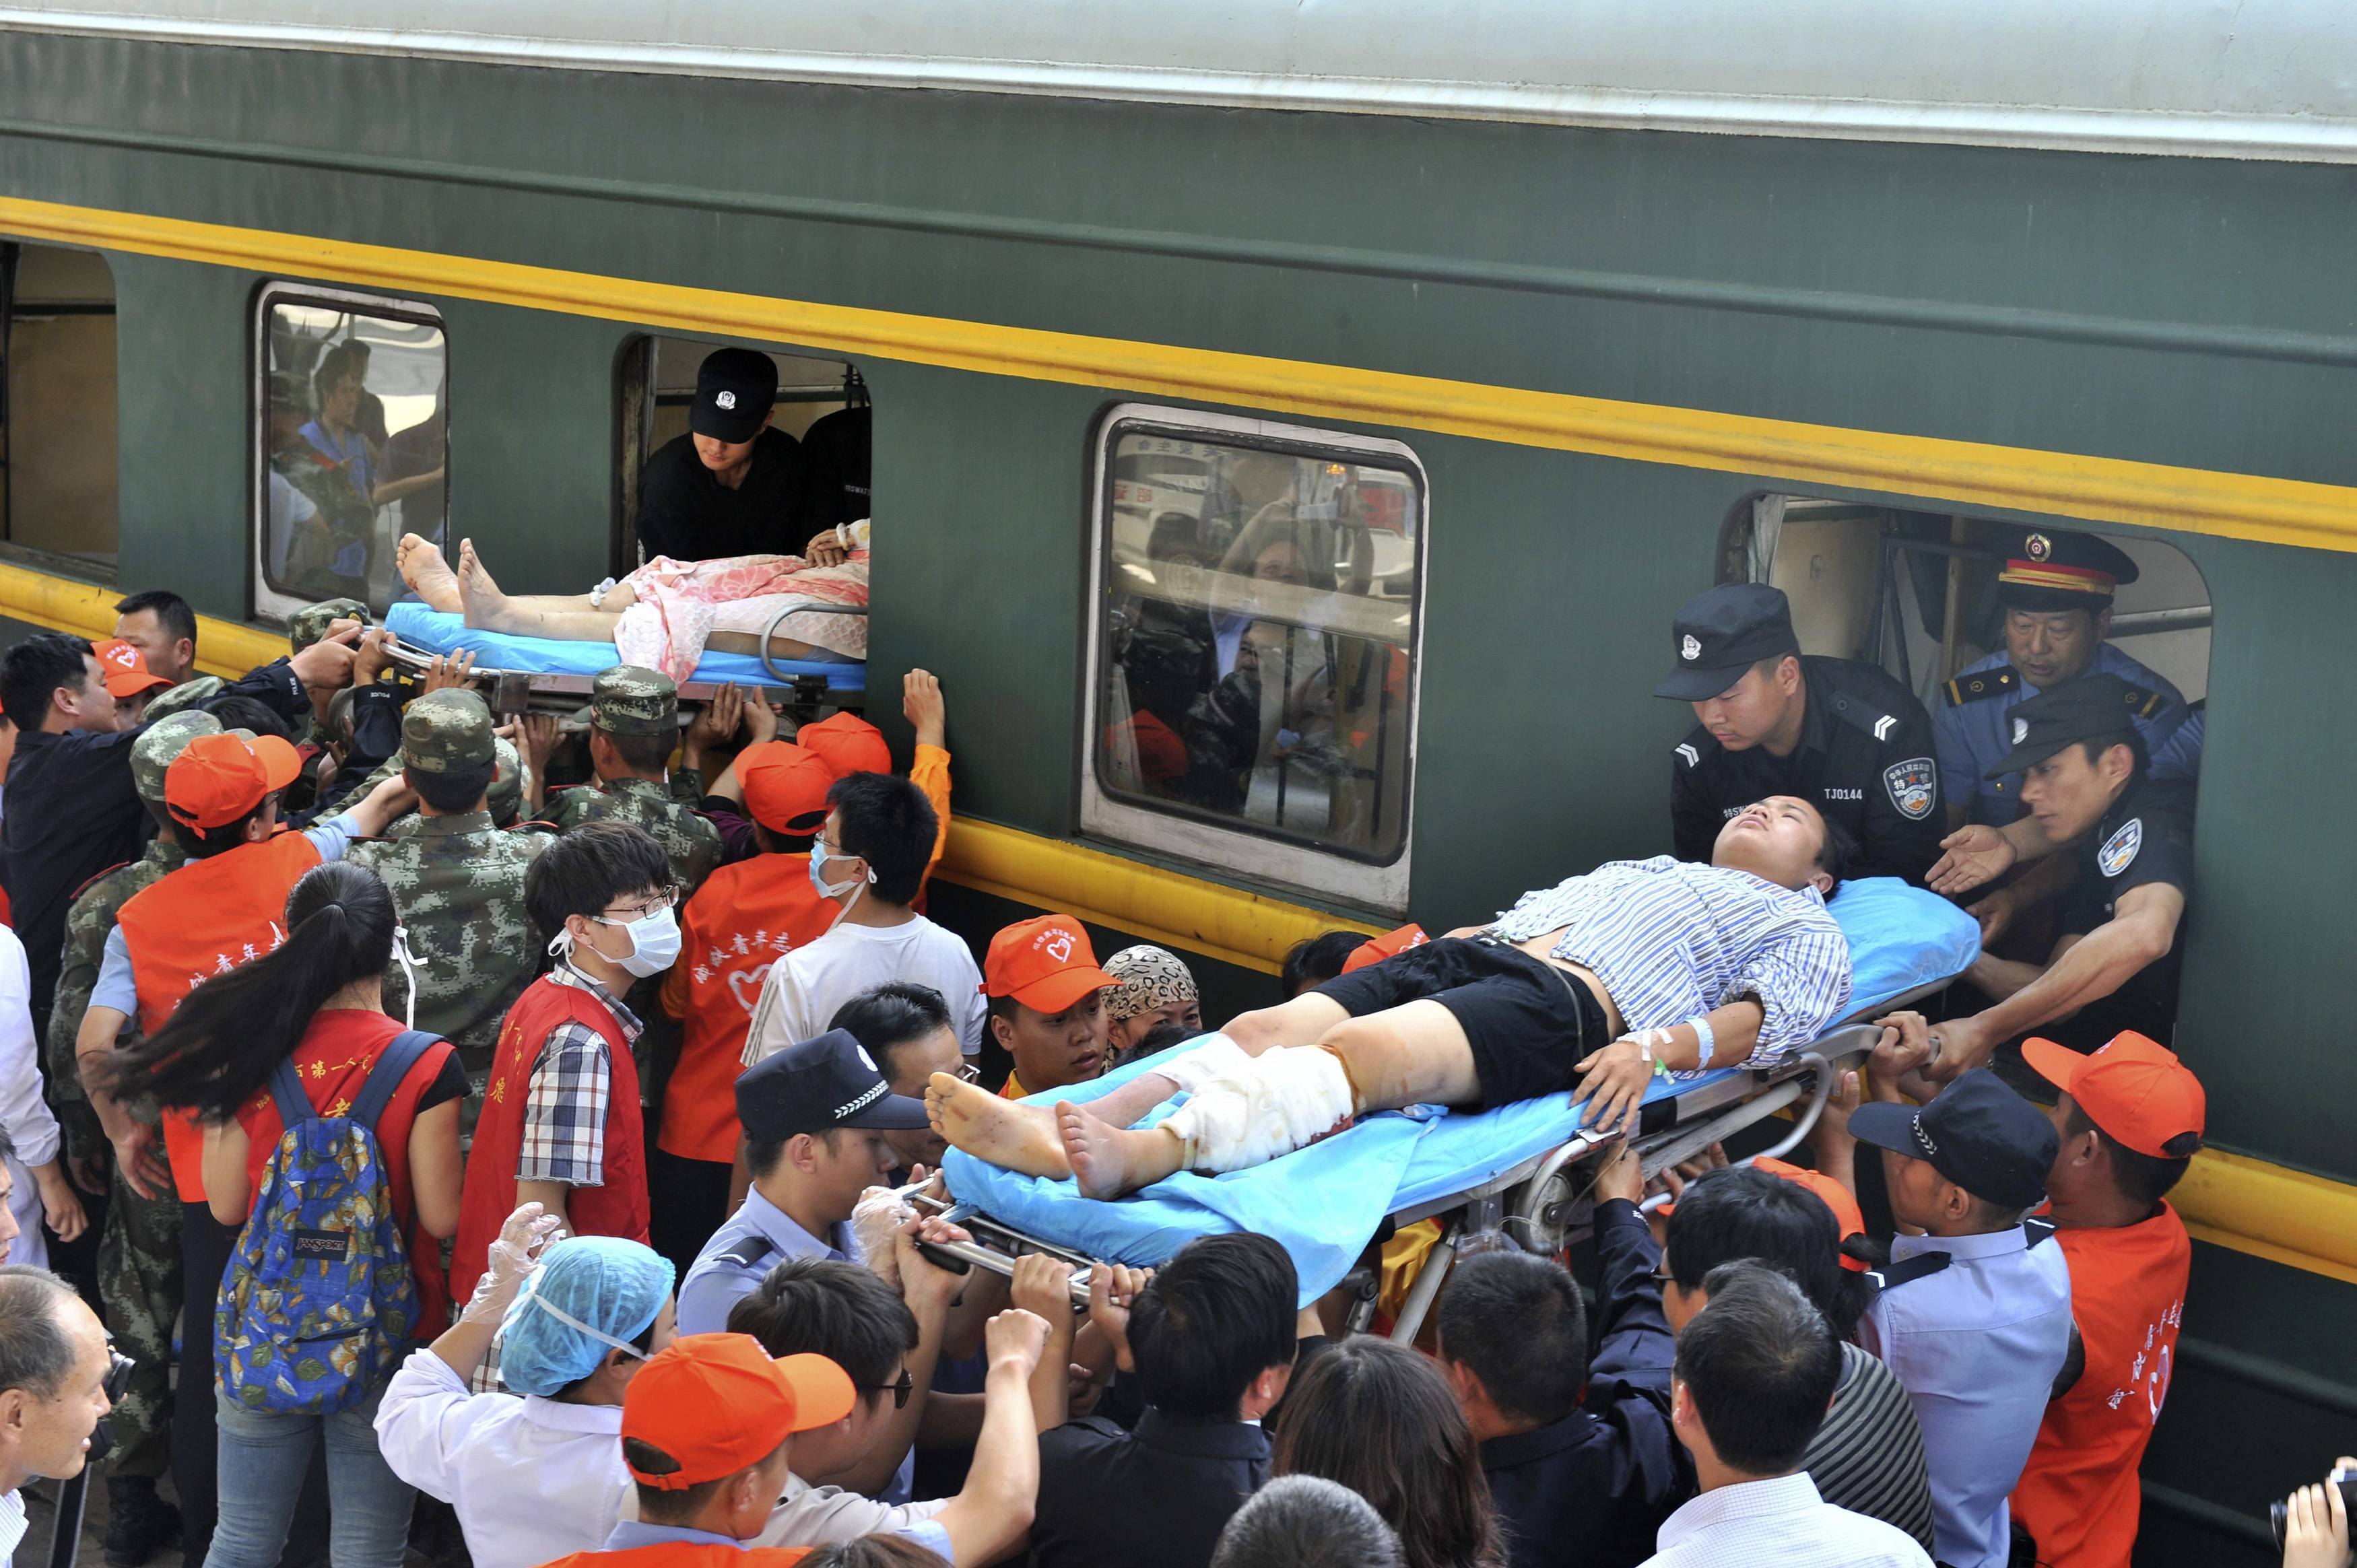 People suffering from severe injuries are transported onto a train heading for Kunming to receive better medical treatment after Sunday's earthquake at a railway station in Zhaotong, Yunnan province, August 5, 2014. (Photo: Reuters)